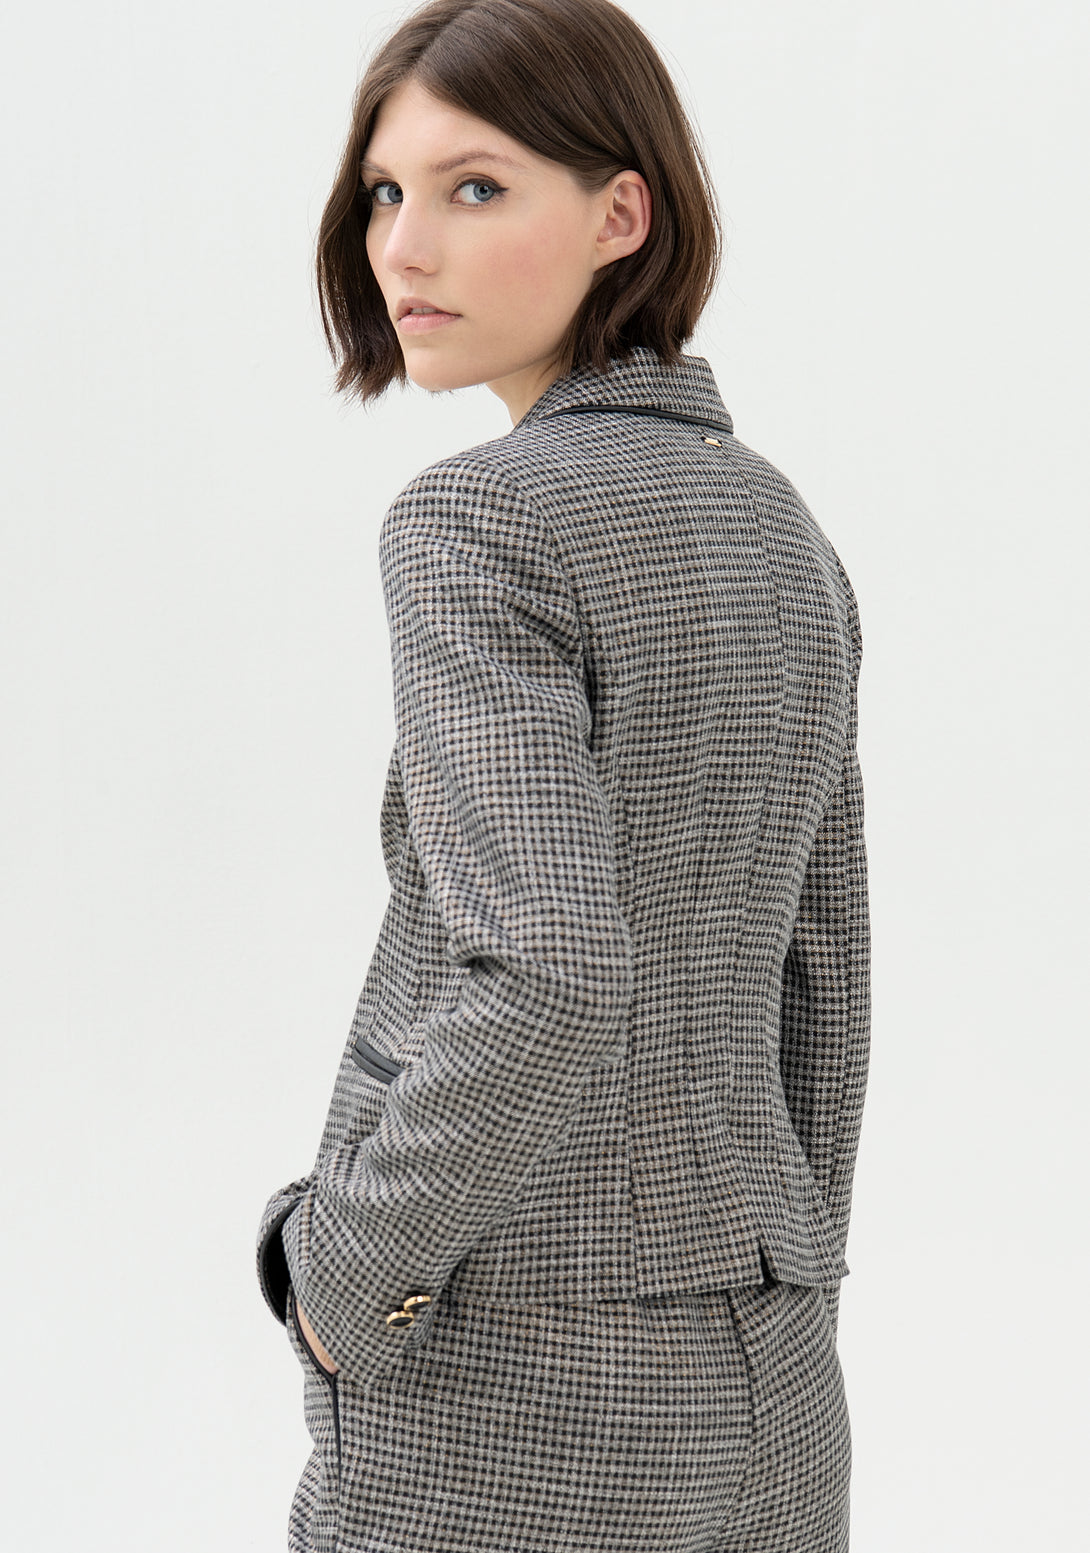 Blazer regular fit single breasted made in tweed with lurex